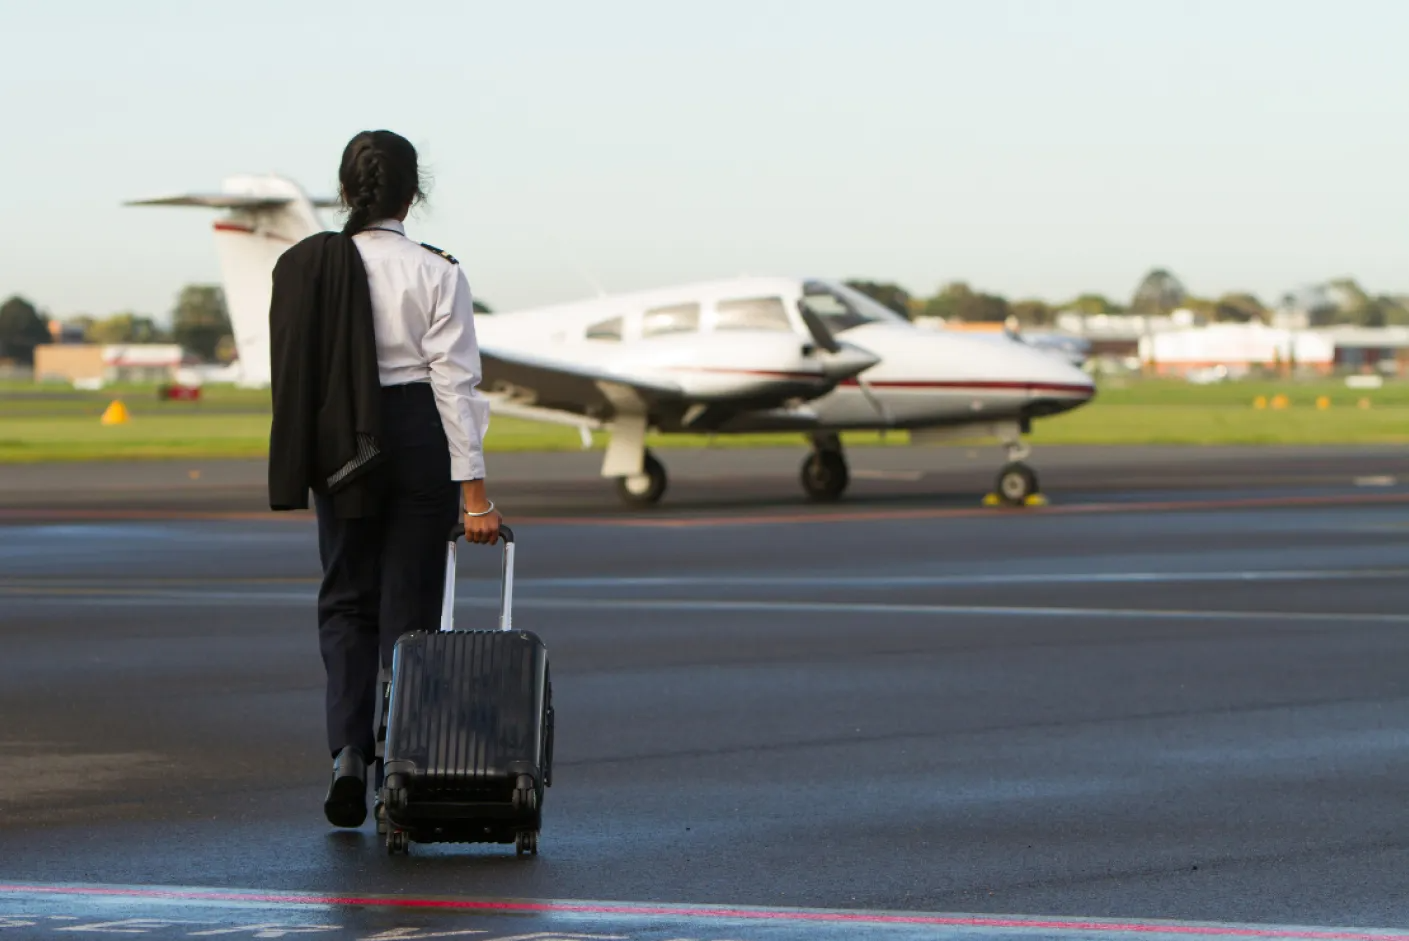 Private pilot exam in India: Tips and tricks to ace the test successfully